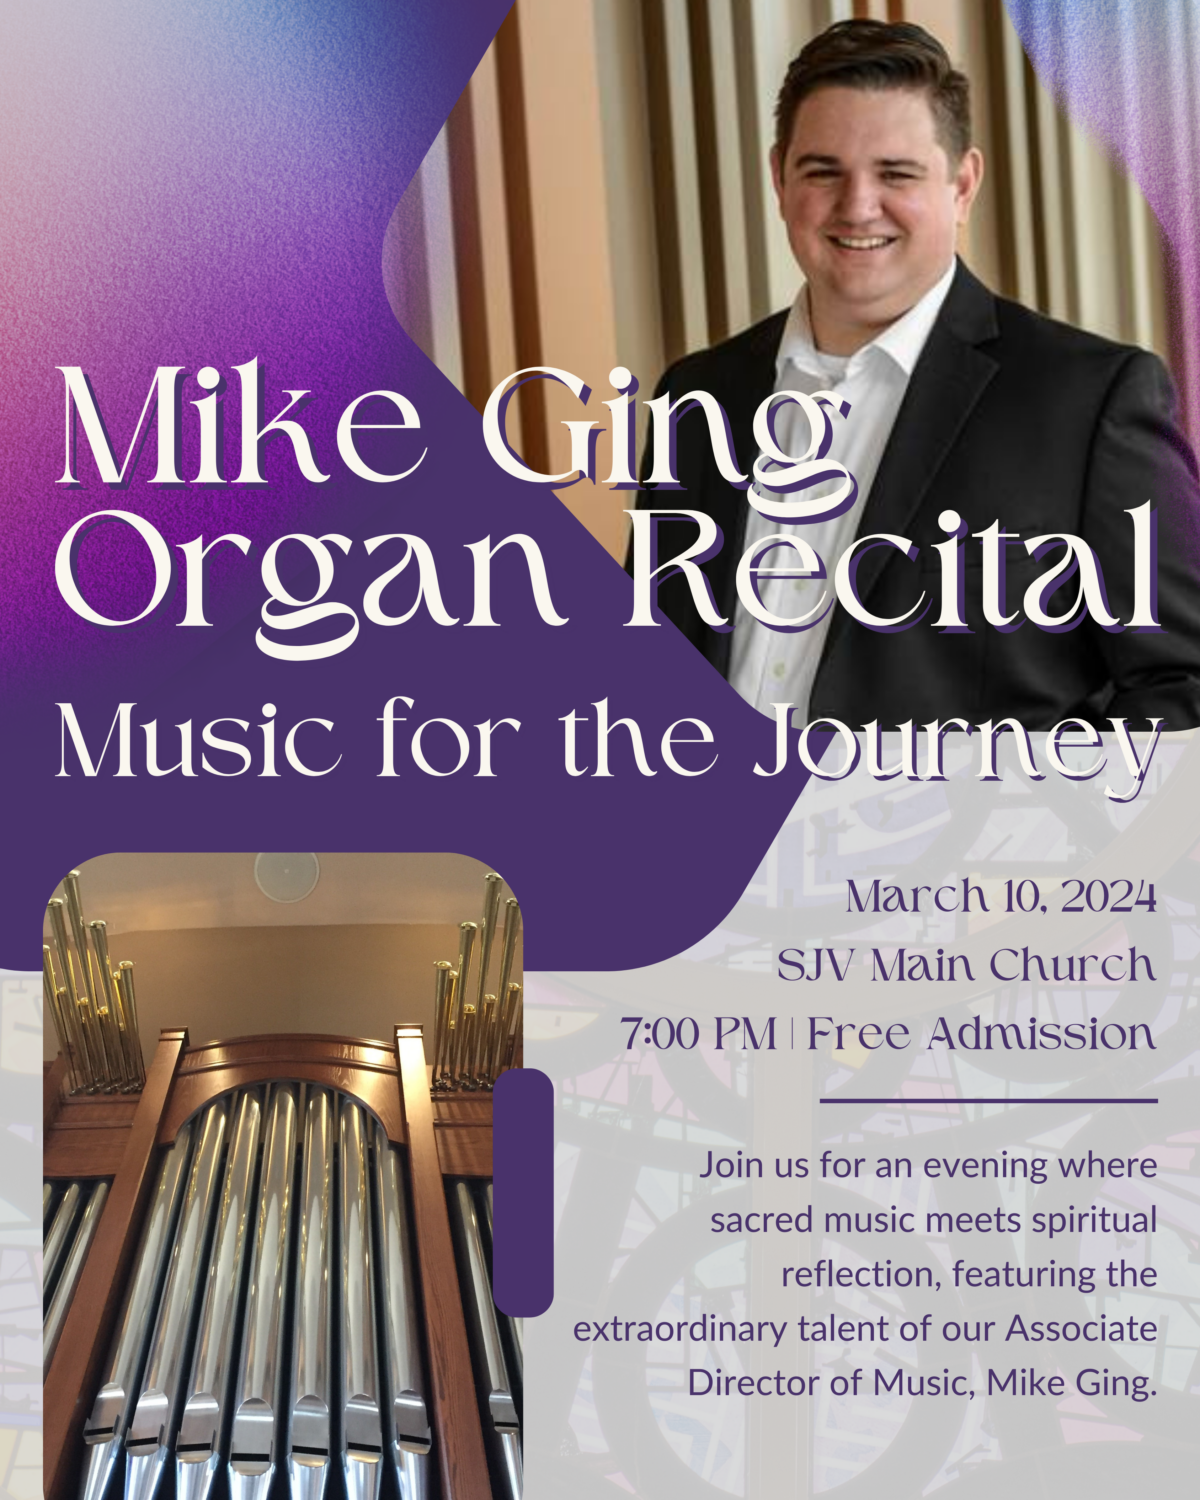 Music for the Journey - Mike Ging Organ Recital